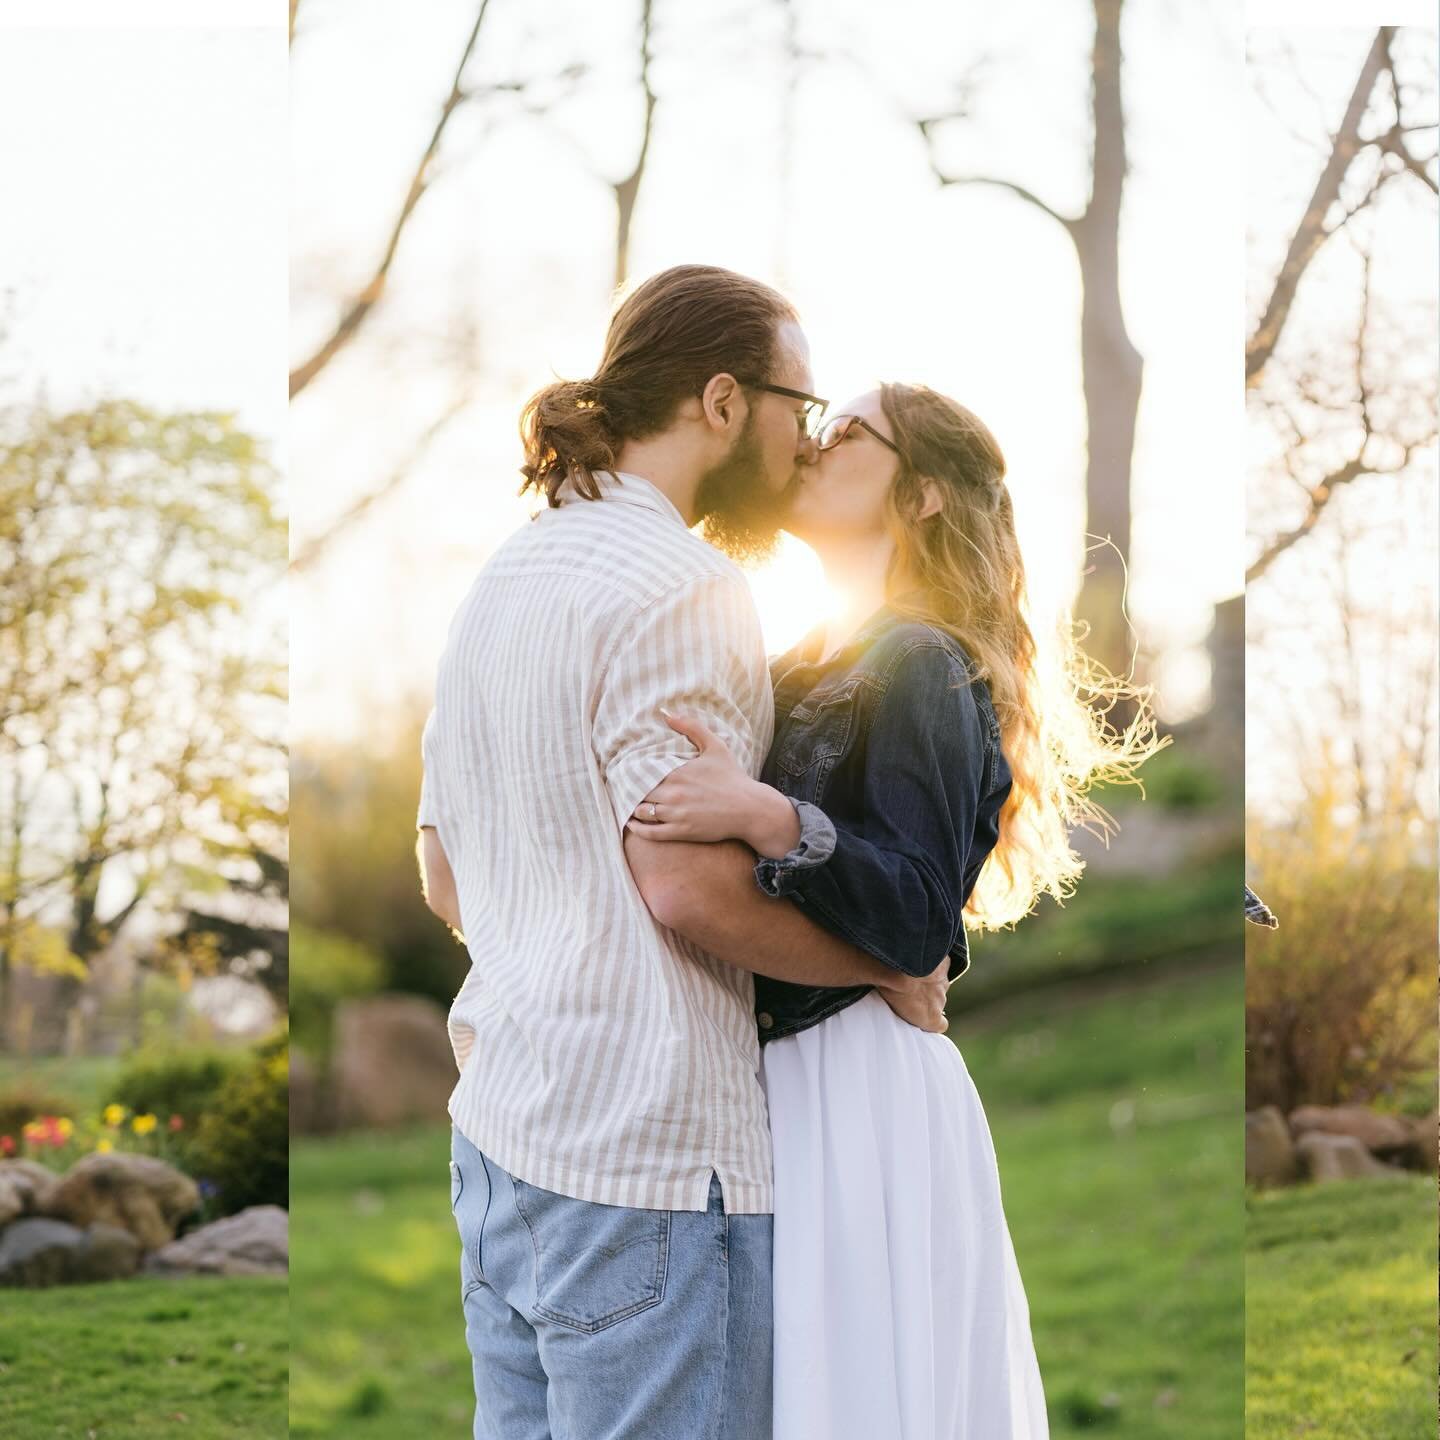 It is a blessing to get to meet and work with these two. Engagement session during golden hour is always dreamy. Can&rsquo;t wait to shoot their wedding. 💕

#engagementphotos #ontarioweddingphotographer #windsorphotographer #goldenhourphotography #t